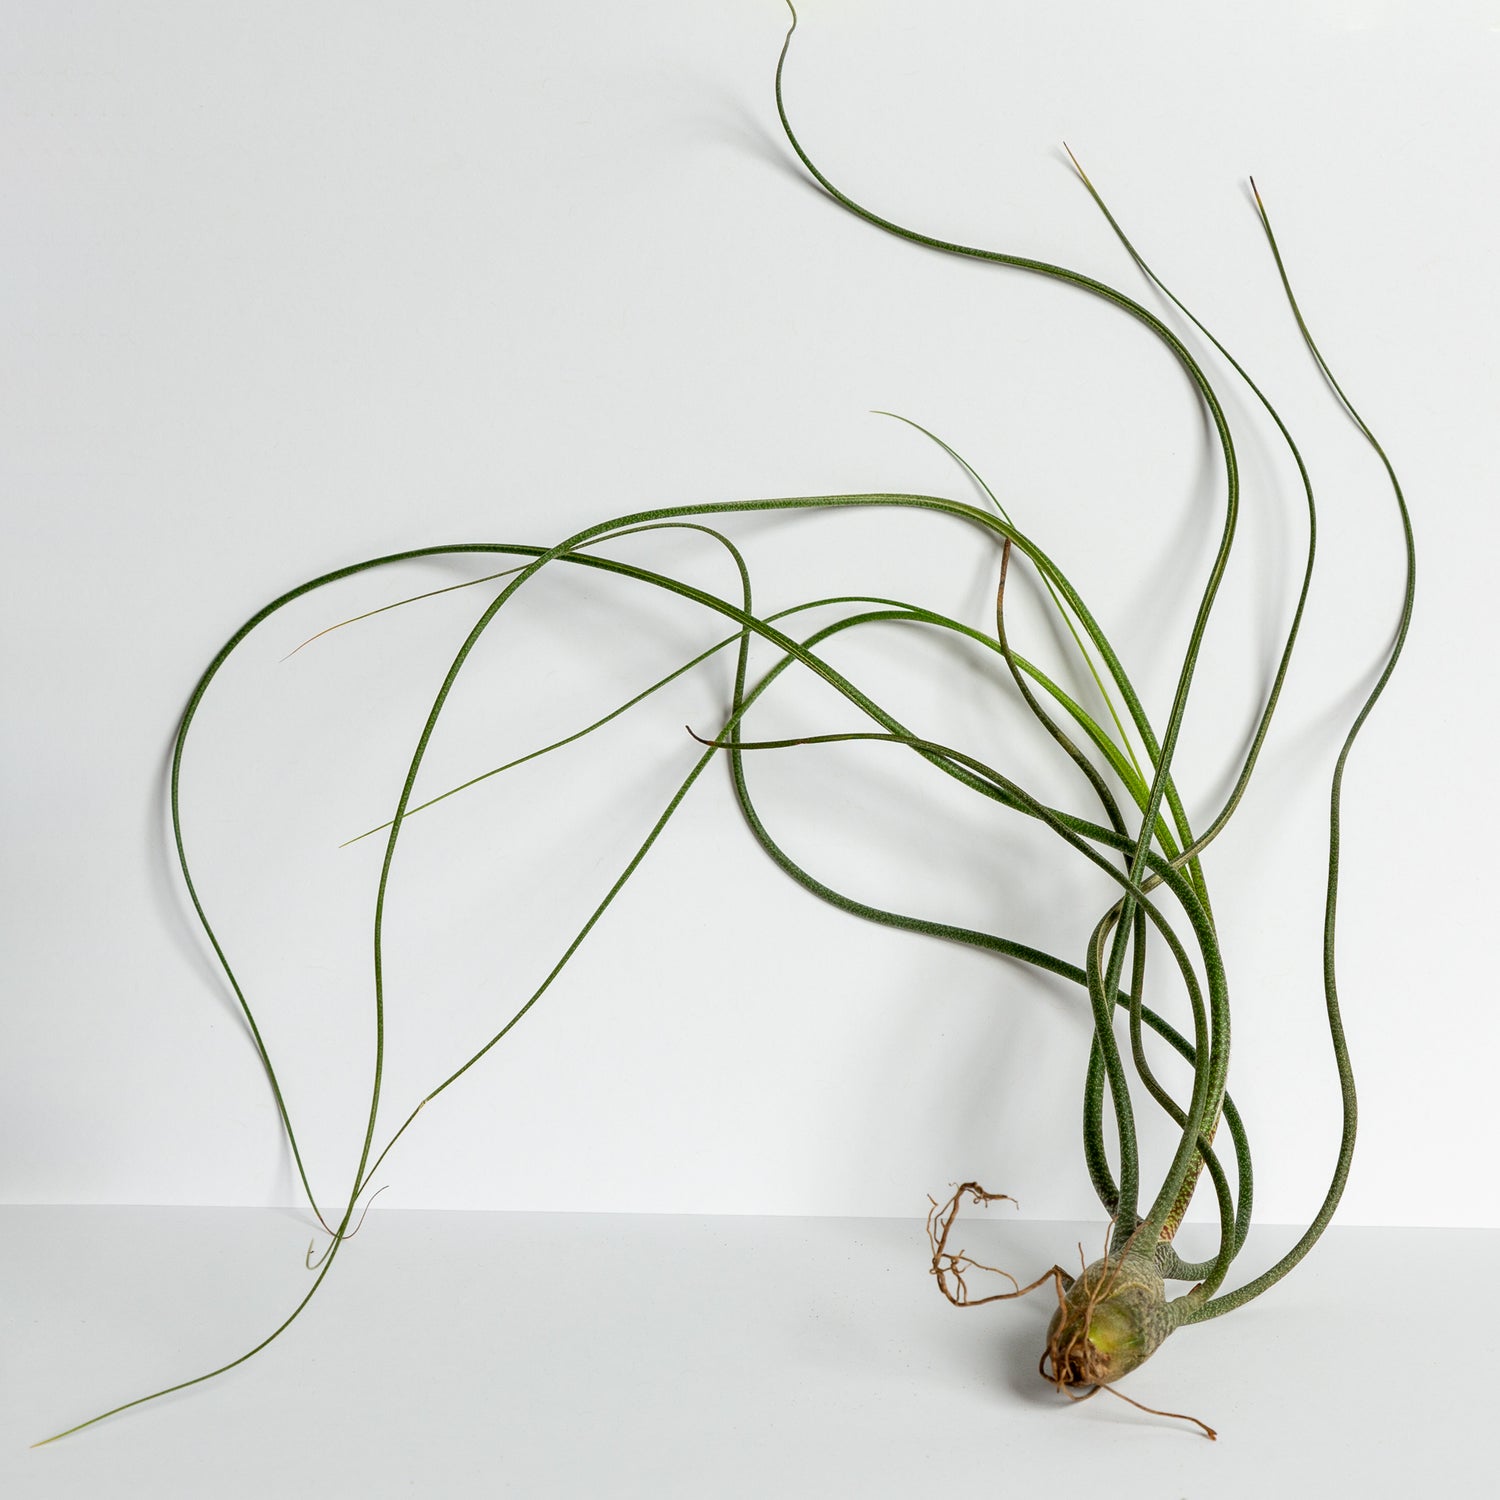 Air Plant 'Butzii' 7-10" - Urban Sprouts